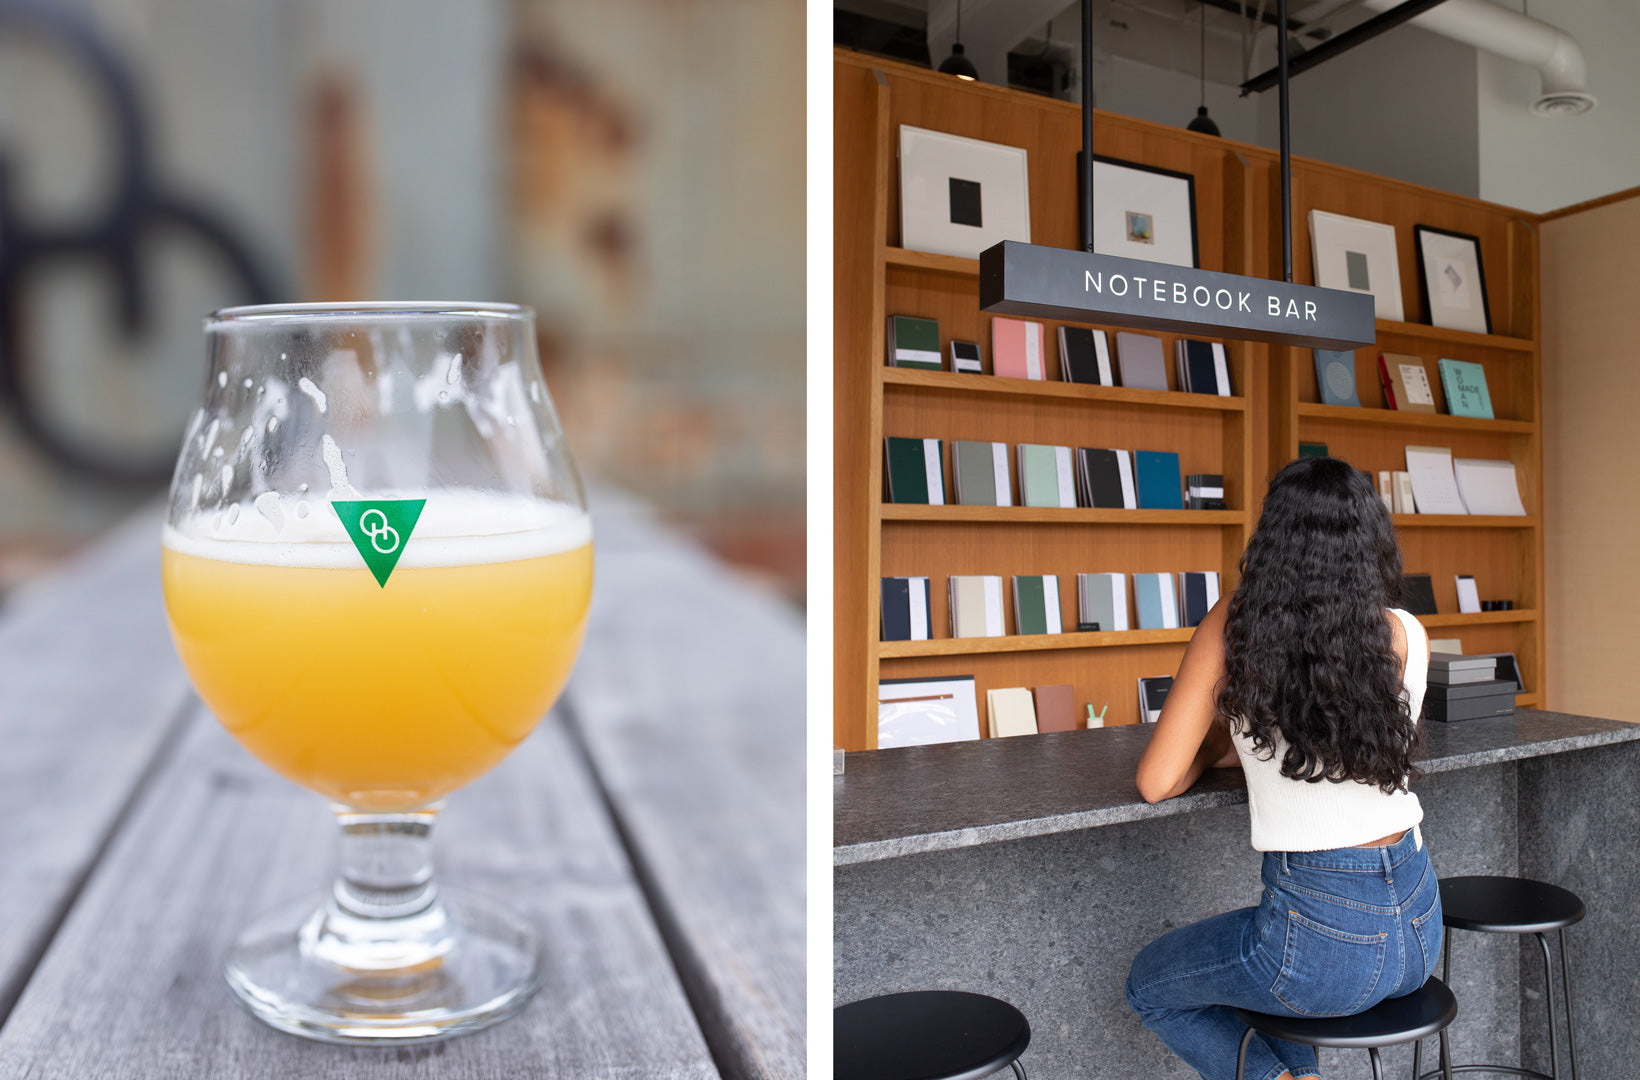 The left image shows a tulip beer glass filled with a gold-colored beer and is emblazoned with a green Other Half logo. The right image shows a woman sitting at the Appointed Notebook Bar. She has long dark hair and wears a cream colored ribbed knit tank top.